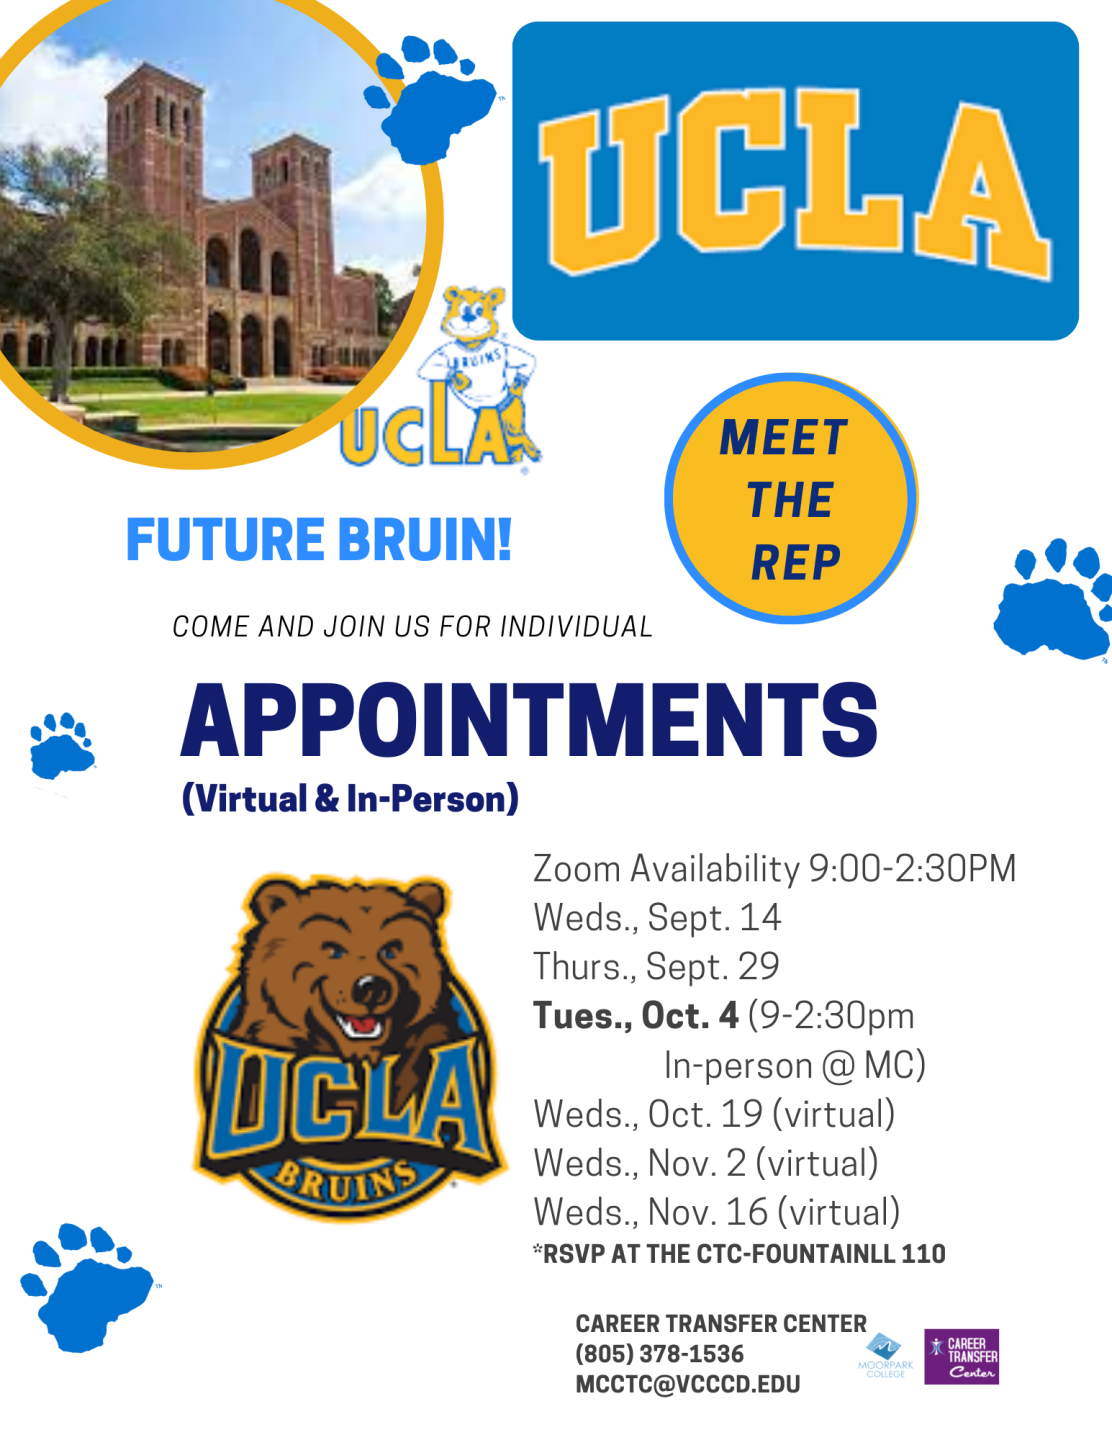 UCLA Representative Appointments flyer